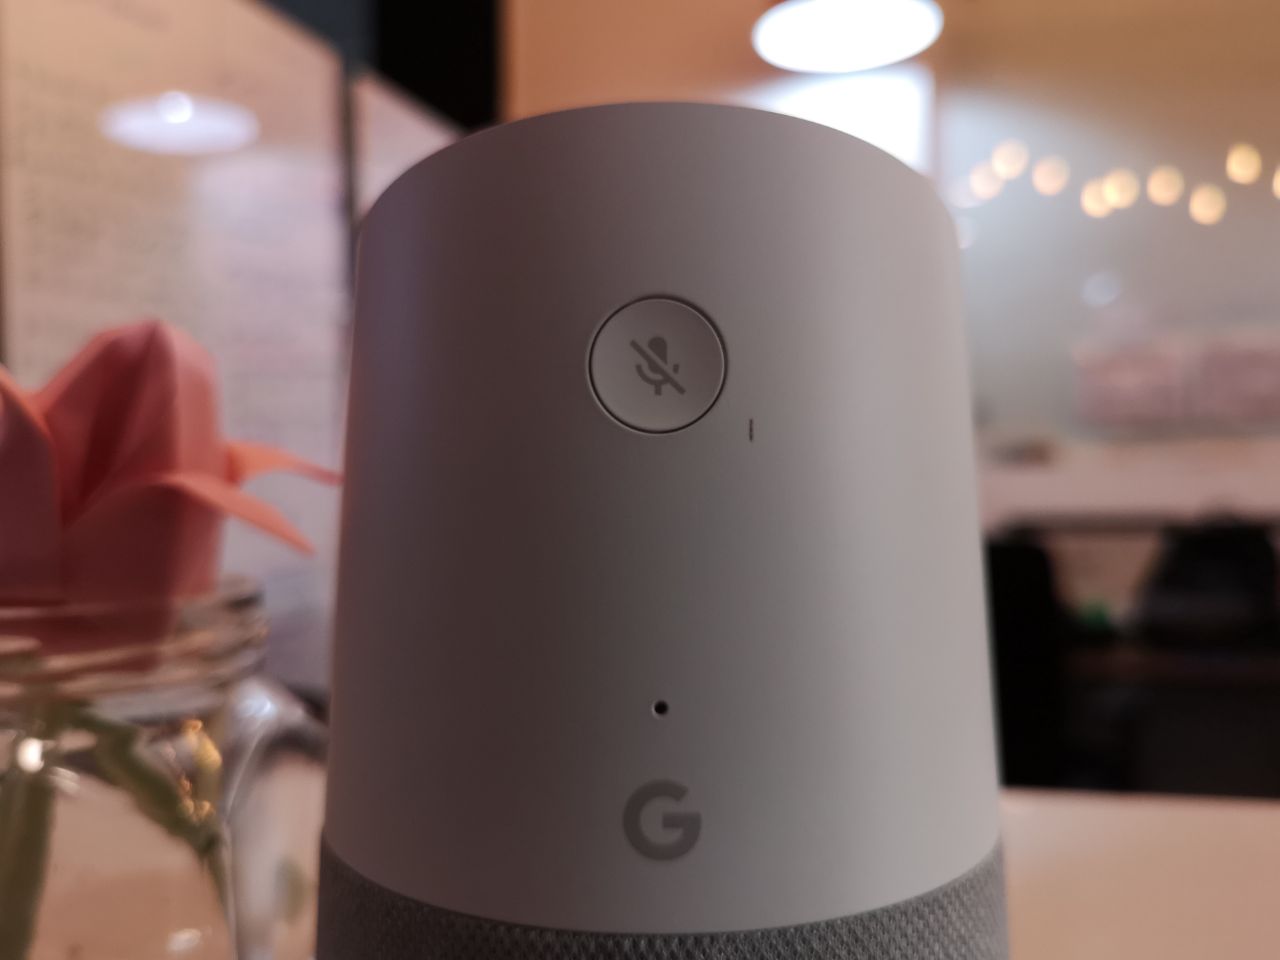 Amazon Alexa, Google Home smart speakers can be turned into 'smart spies'